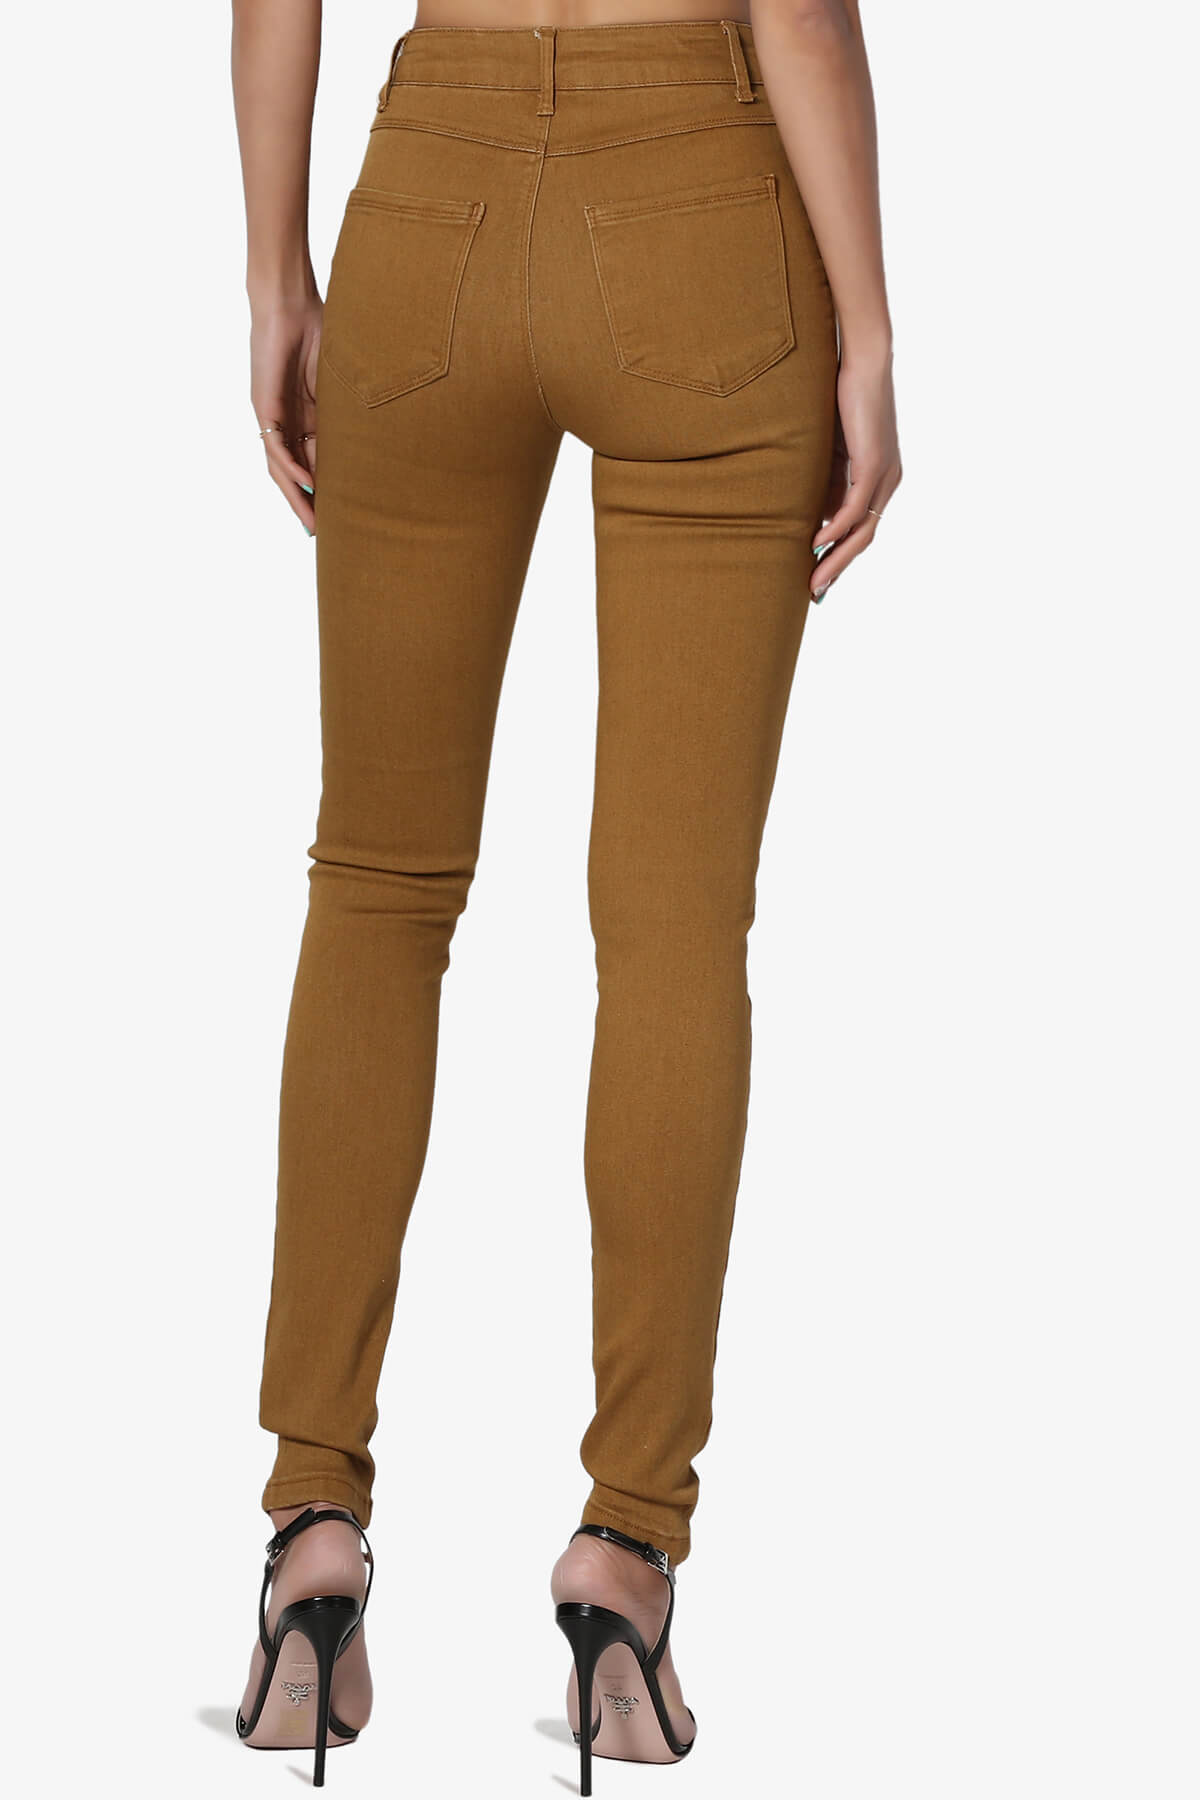 Women's Must-Have Colored High Rise Ankle Skinny Jeans Stretch Denim Jeggings - image 2 of 7